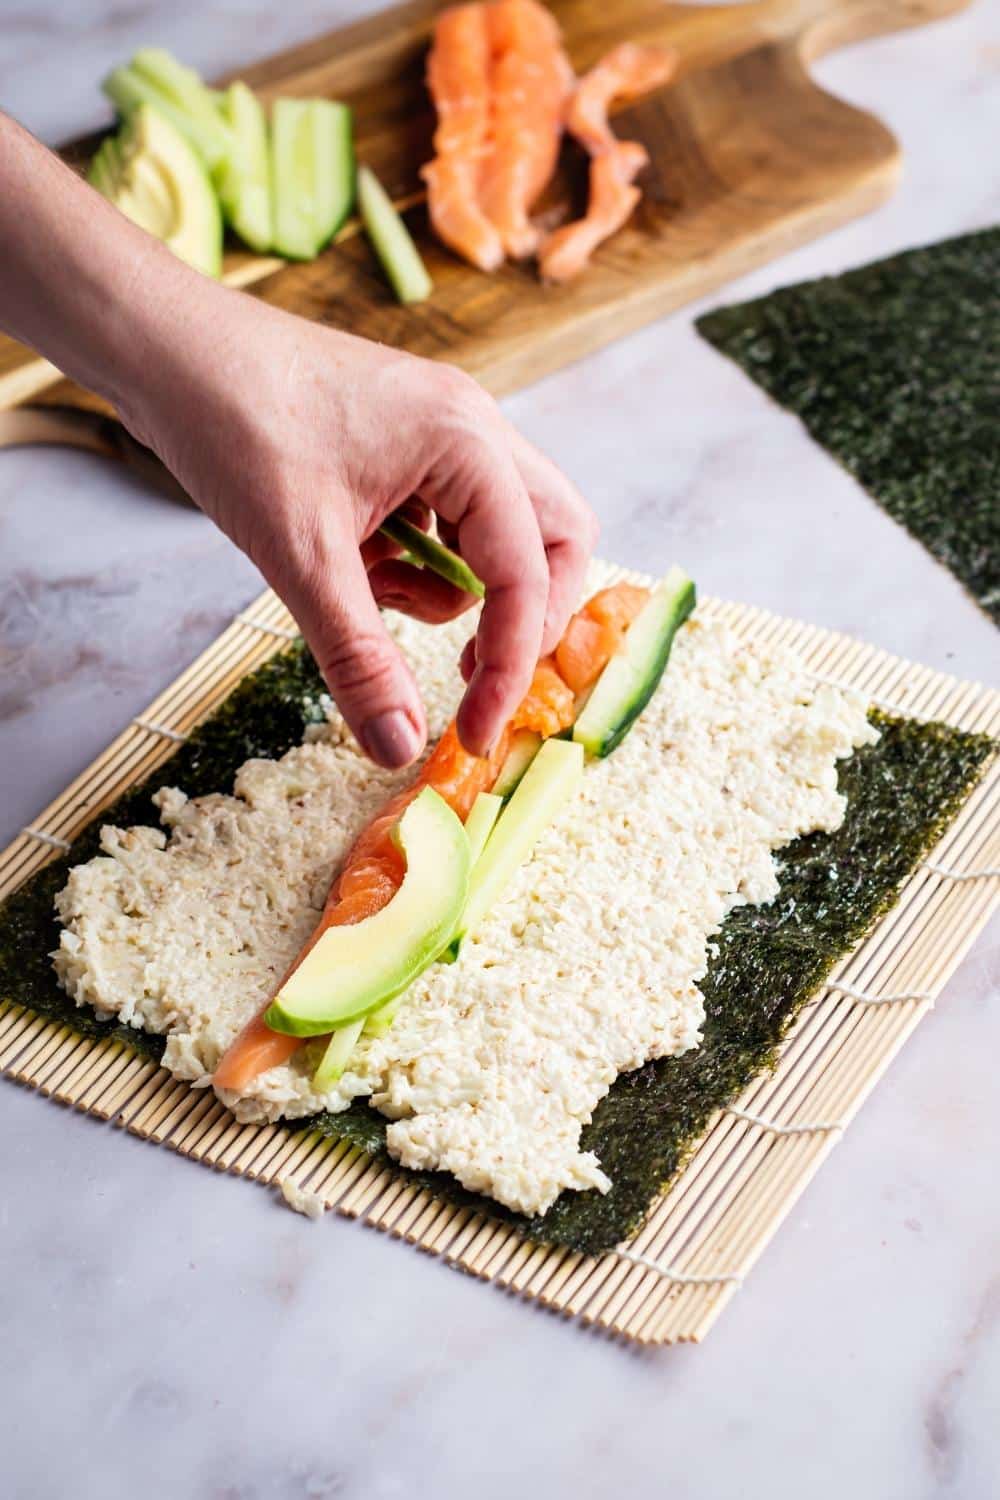 A hand placing avocado on a piece of salmon that is on a bed of cauliflower rice spread across nori on a bamboo sheet.